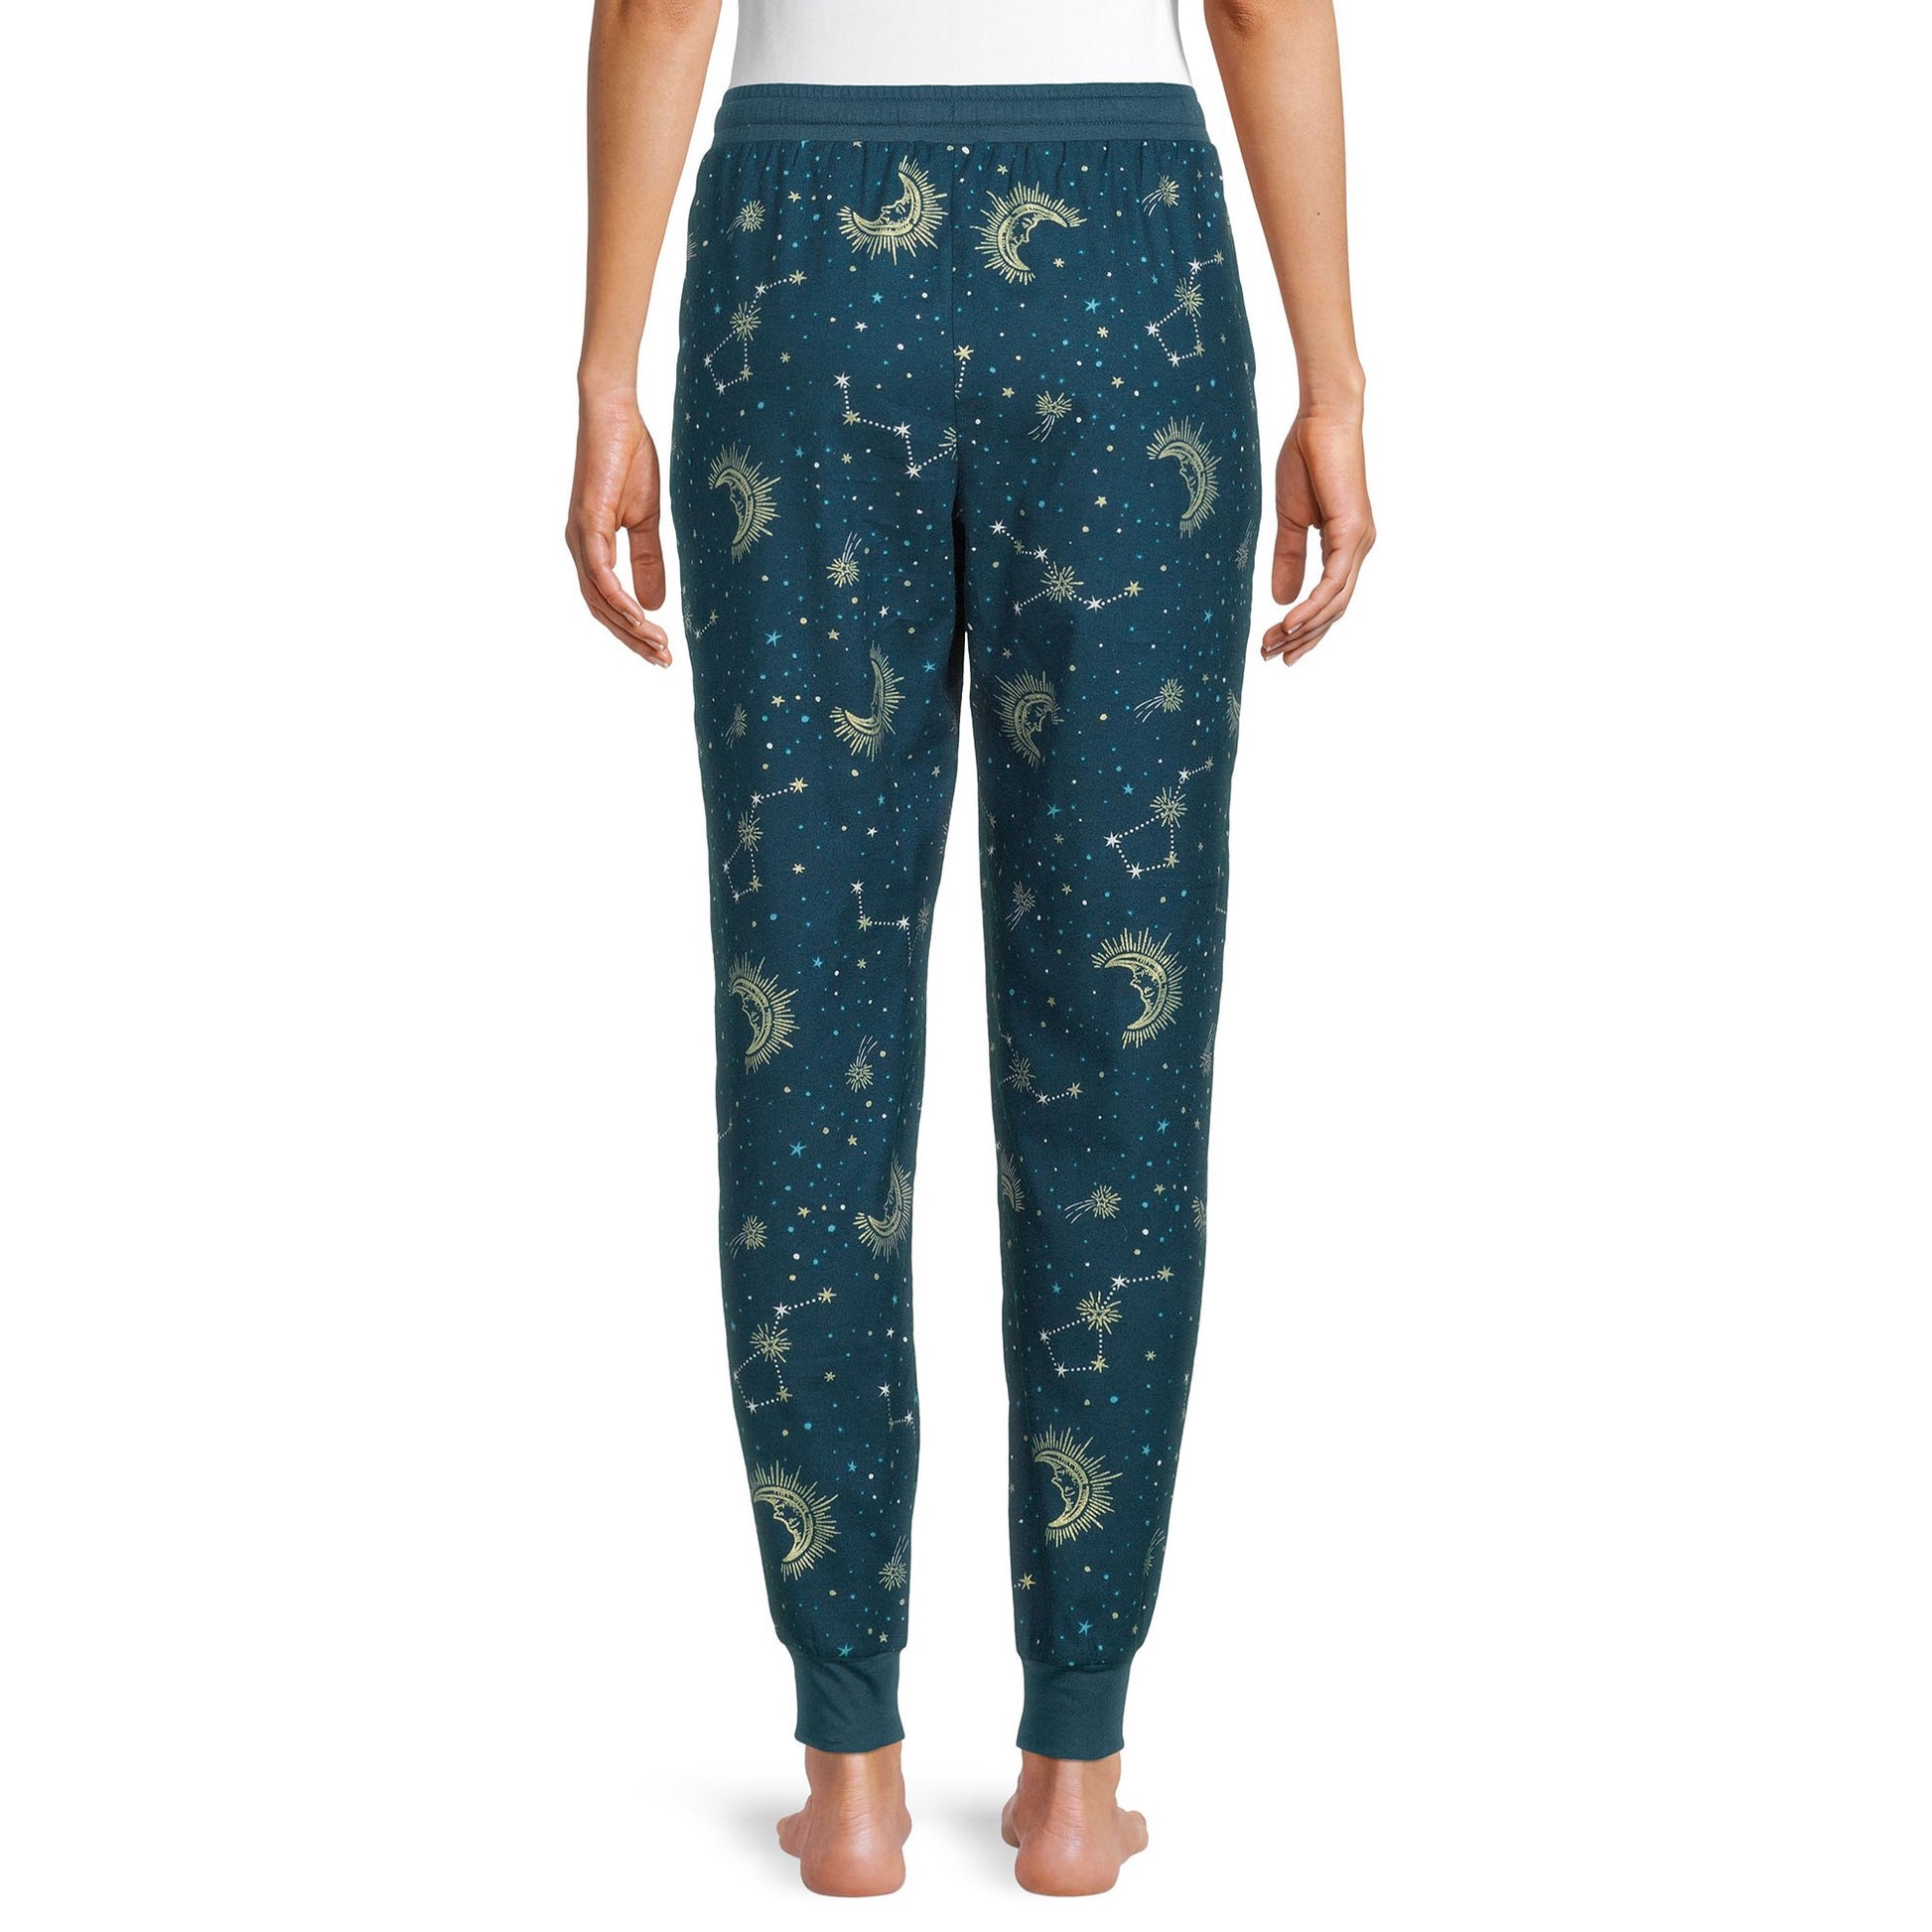 Light Weight Flannel Joggers Size Small Moon/Stars - Tigbul's Variety Fashion Shop